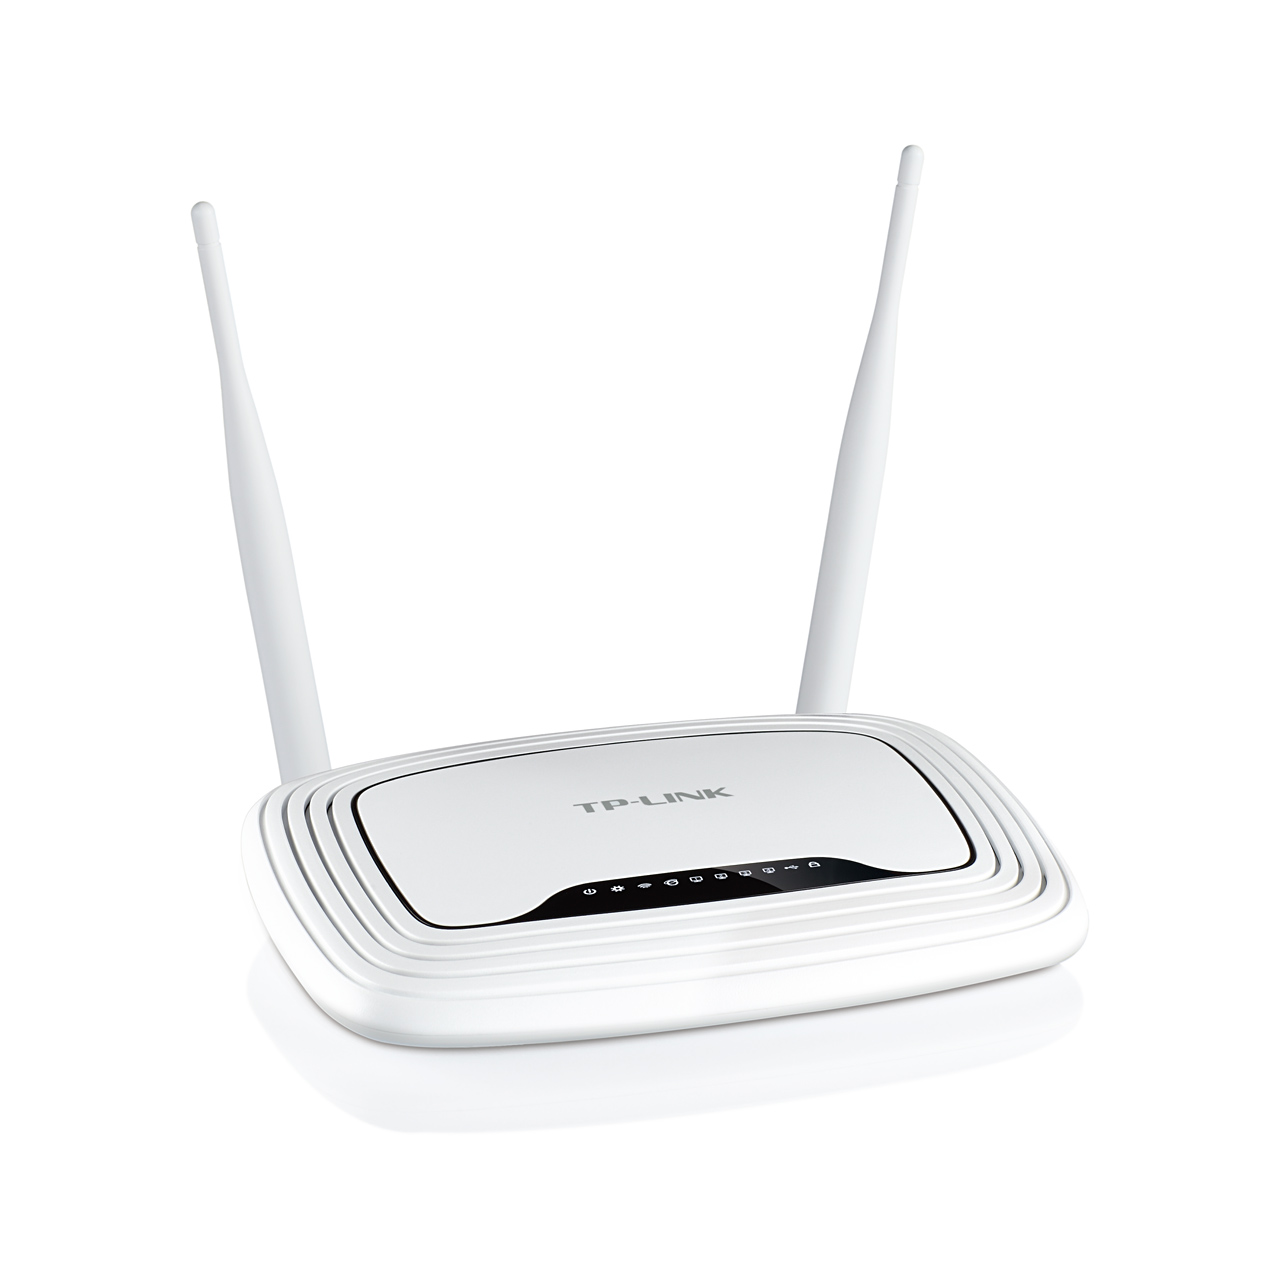 TL-WR842ND 300Mbps Multi-Function Wireless N Router -Lisconet